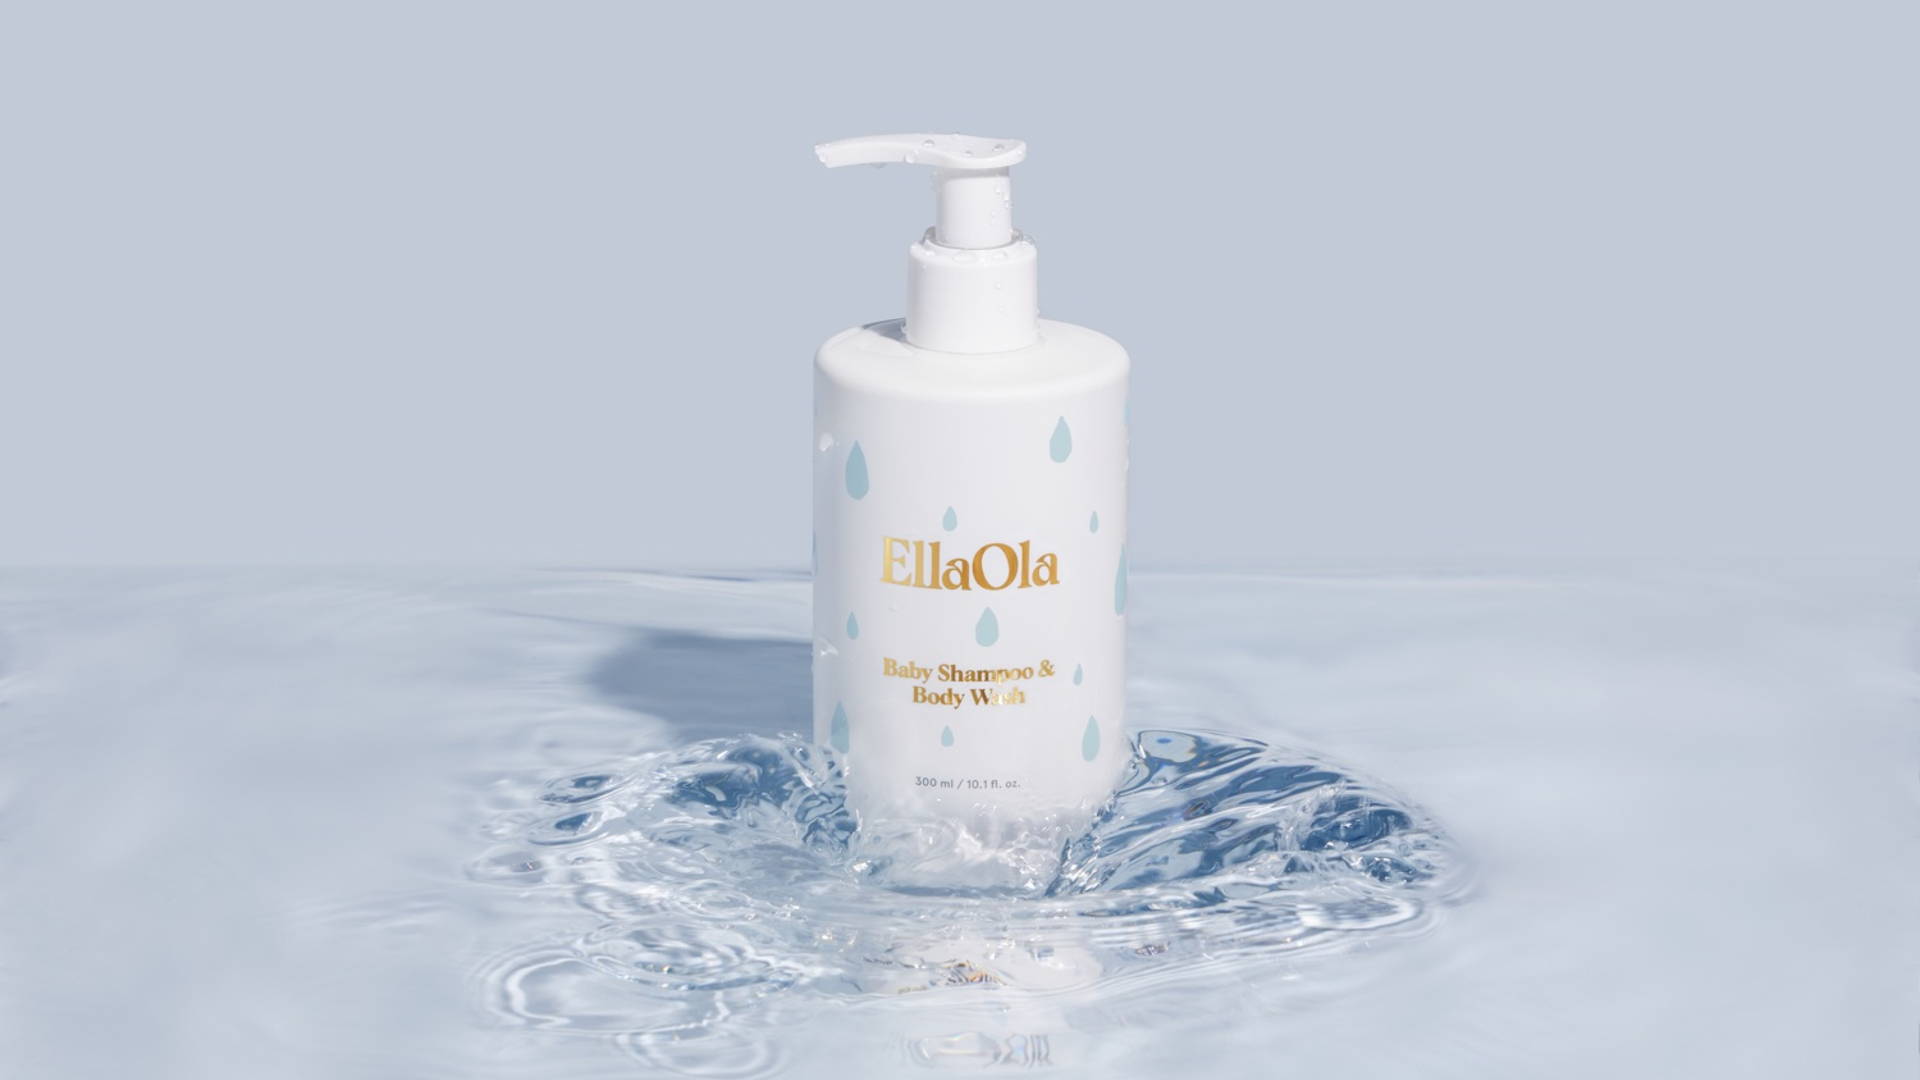 Featured image for Ella Ola's Polished And Pure Baby Product Packaging System